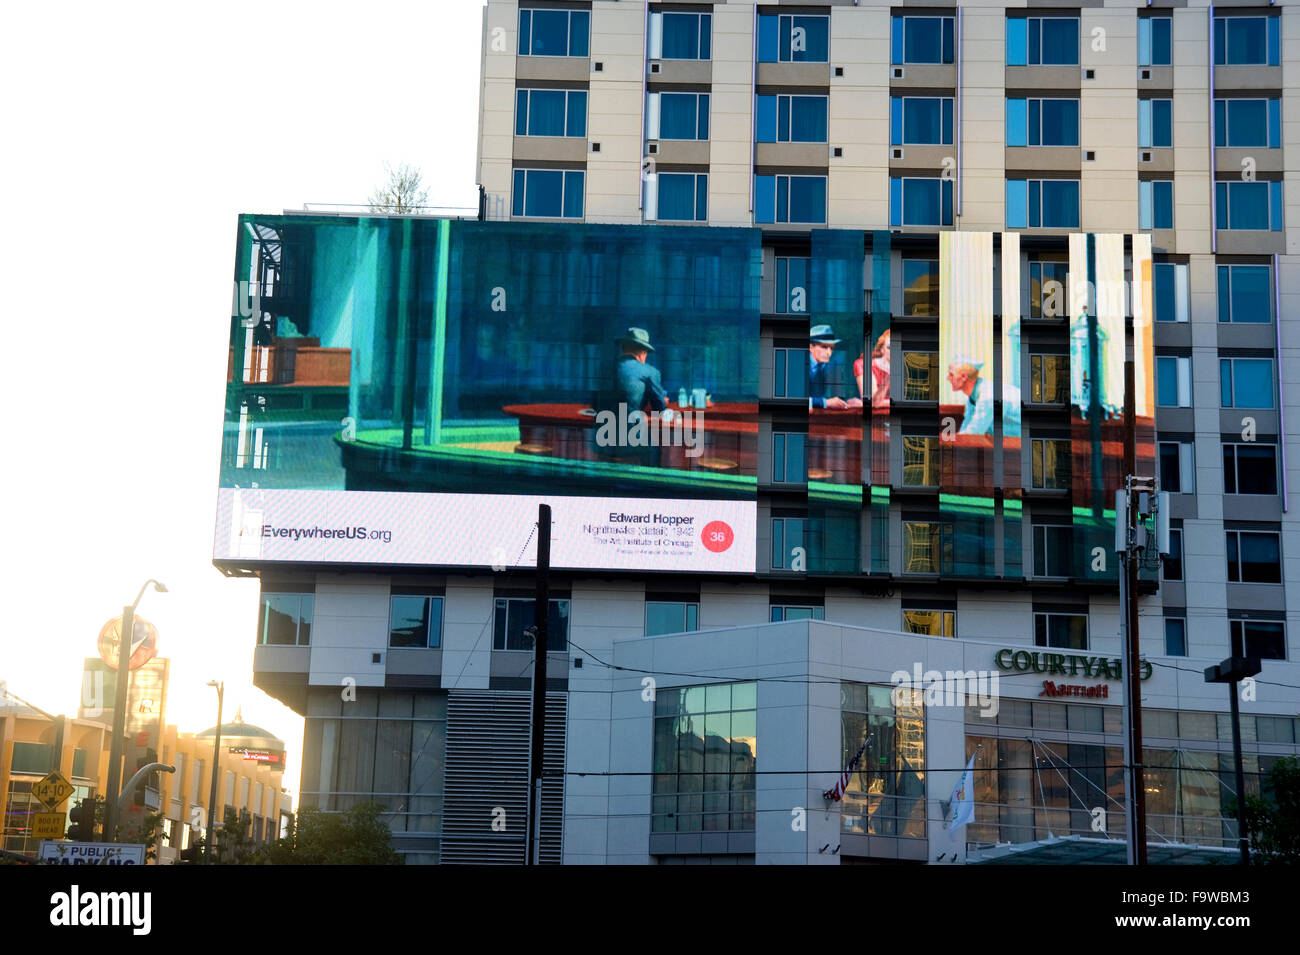 An Edward Hopper painting appears on a digital billboard in Downtown Los Angeles during the Art Everywhere event. Stock Photo